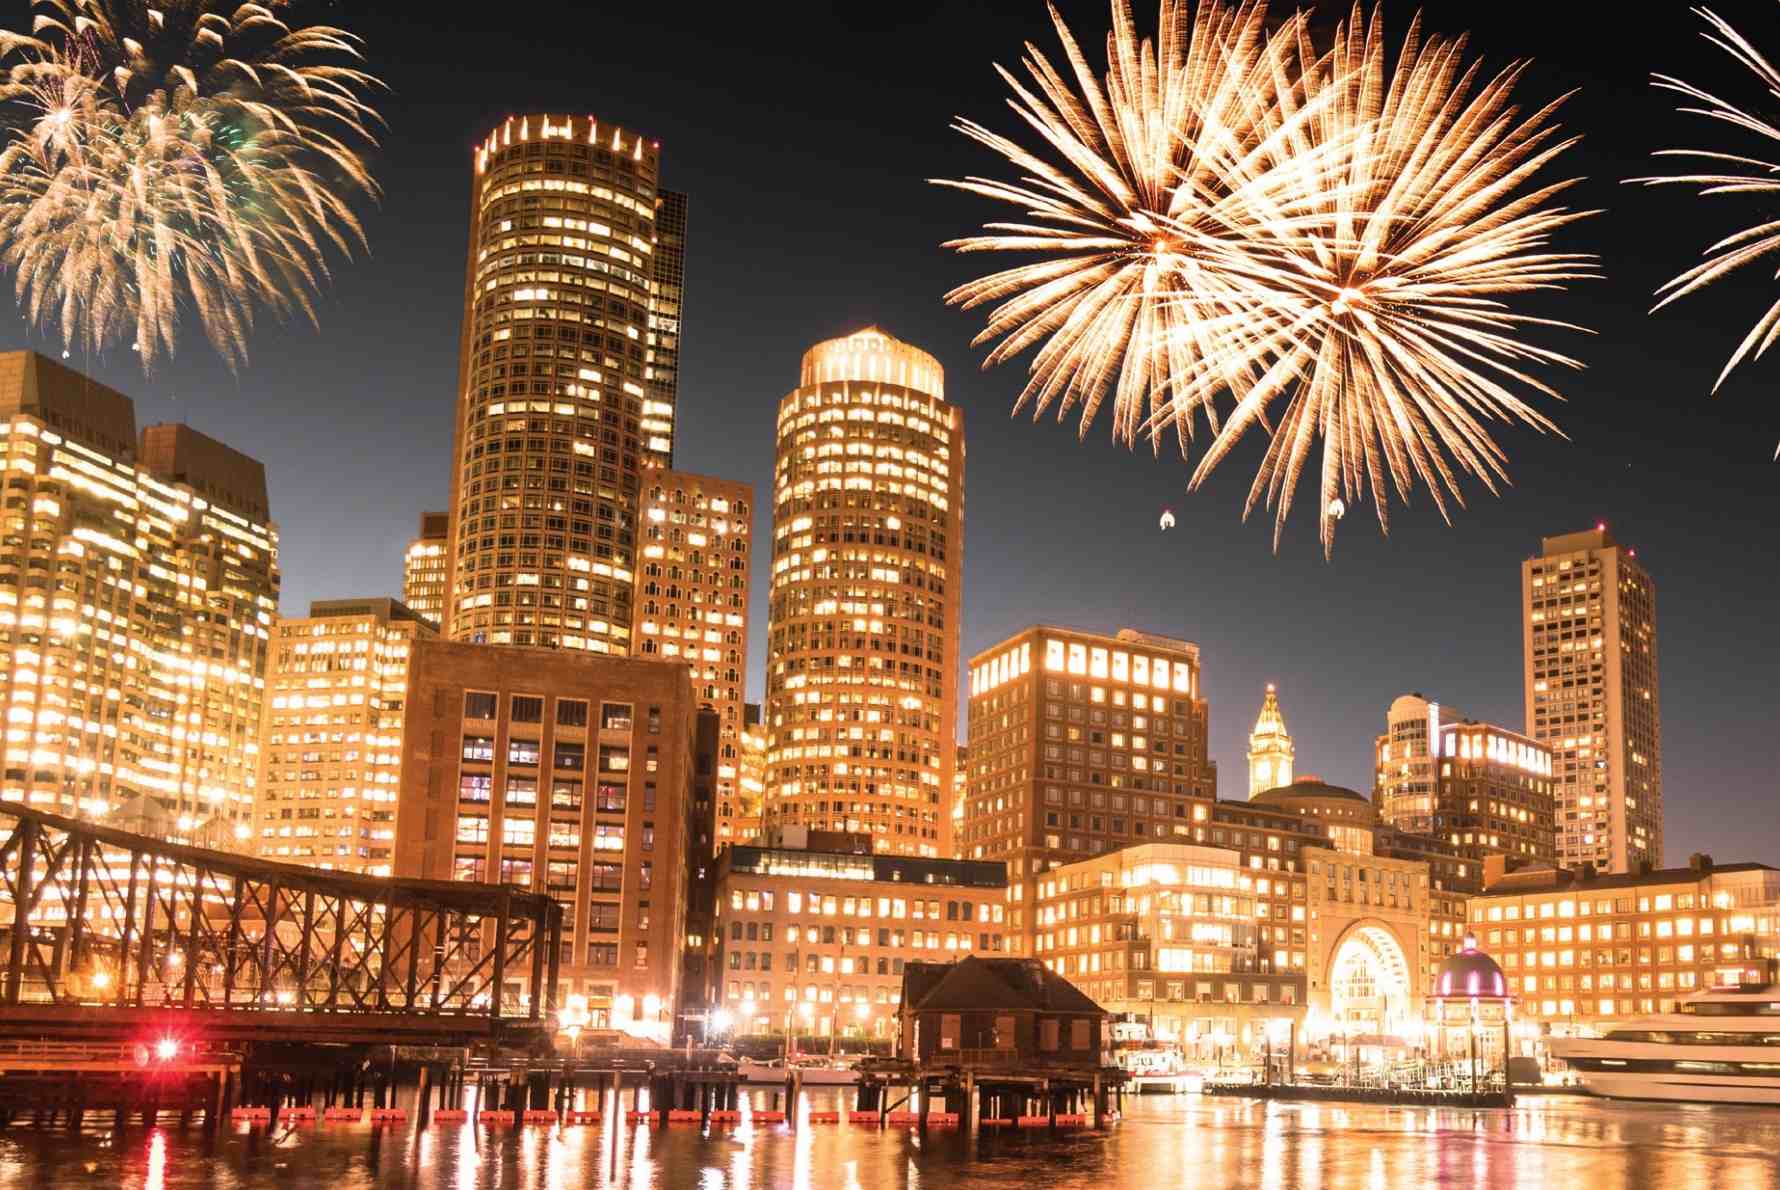 Share your plan  Boston-seaport-Friends-of-Christopher-Columbus-Park-New-Years-Eve-Fireworks-1780x1190